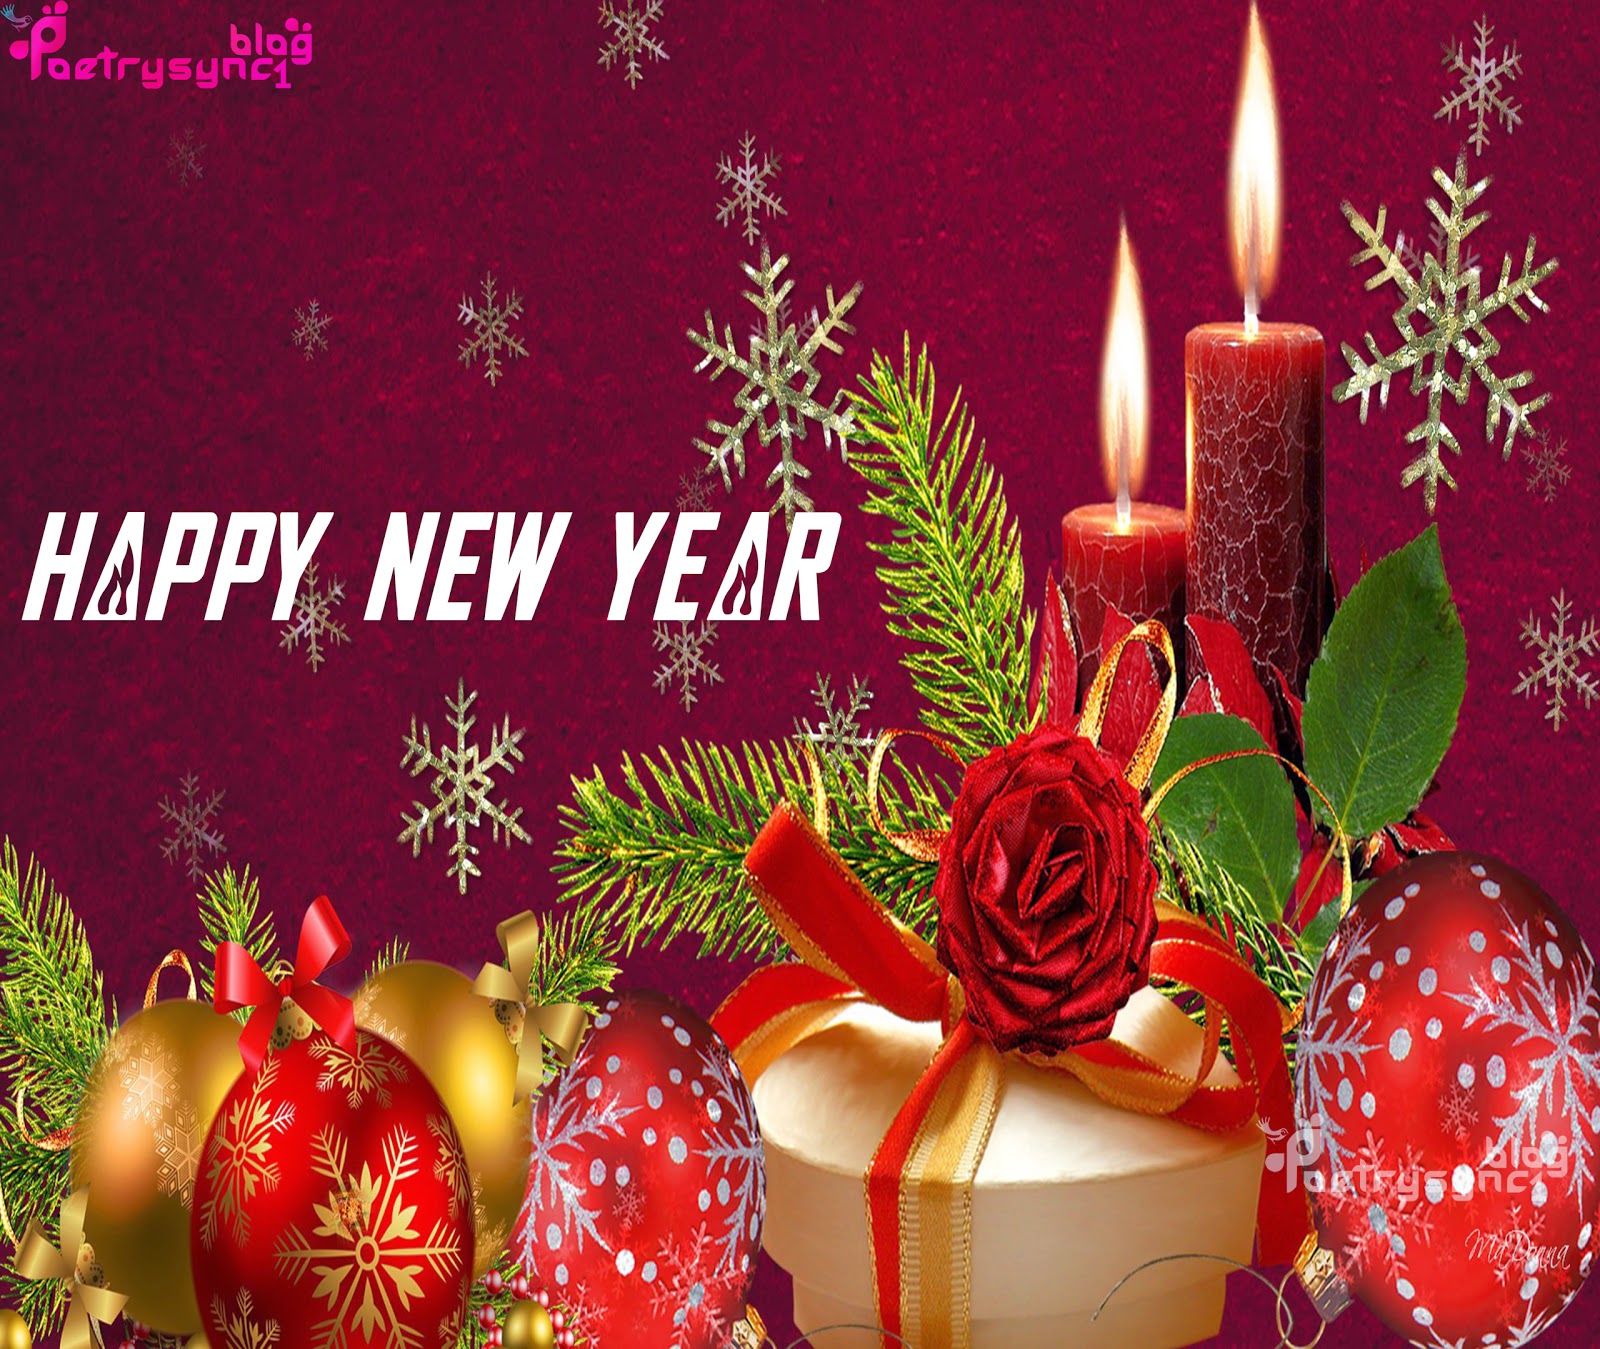 Happy-new-year-Hd-wallpaper-Wide-With-Wishes-sms-Wide